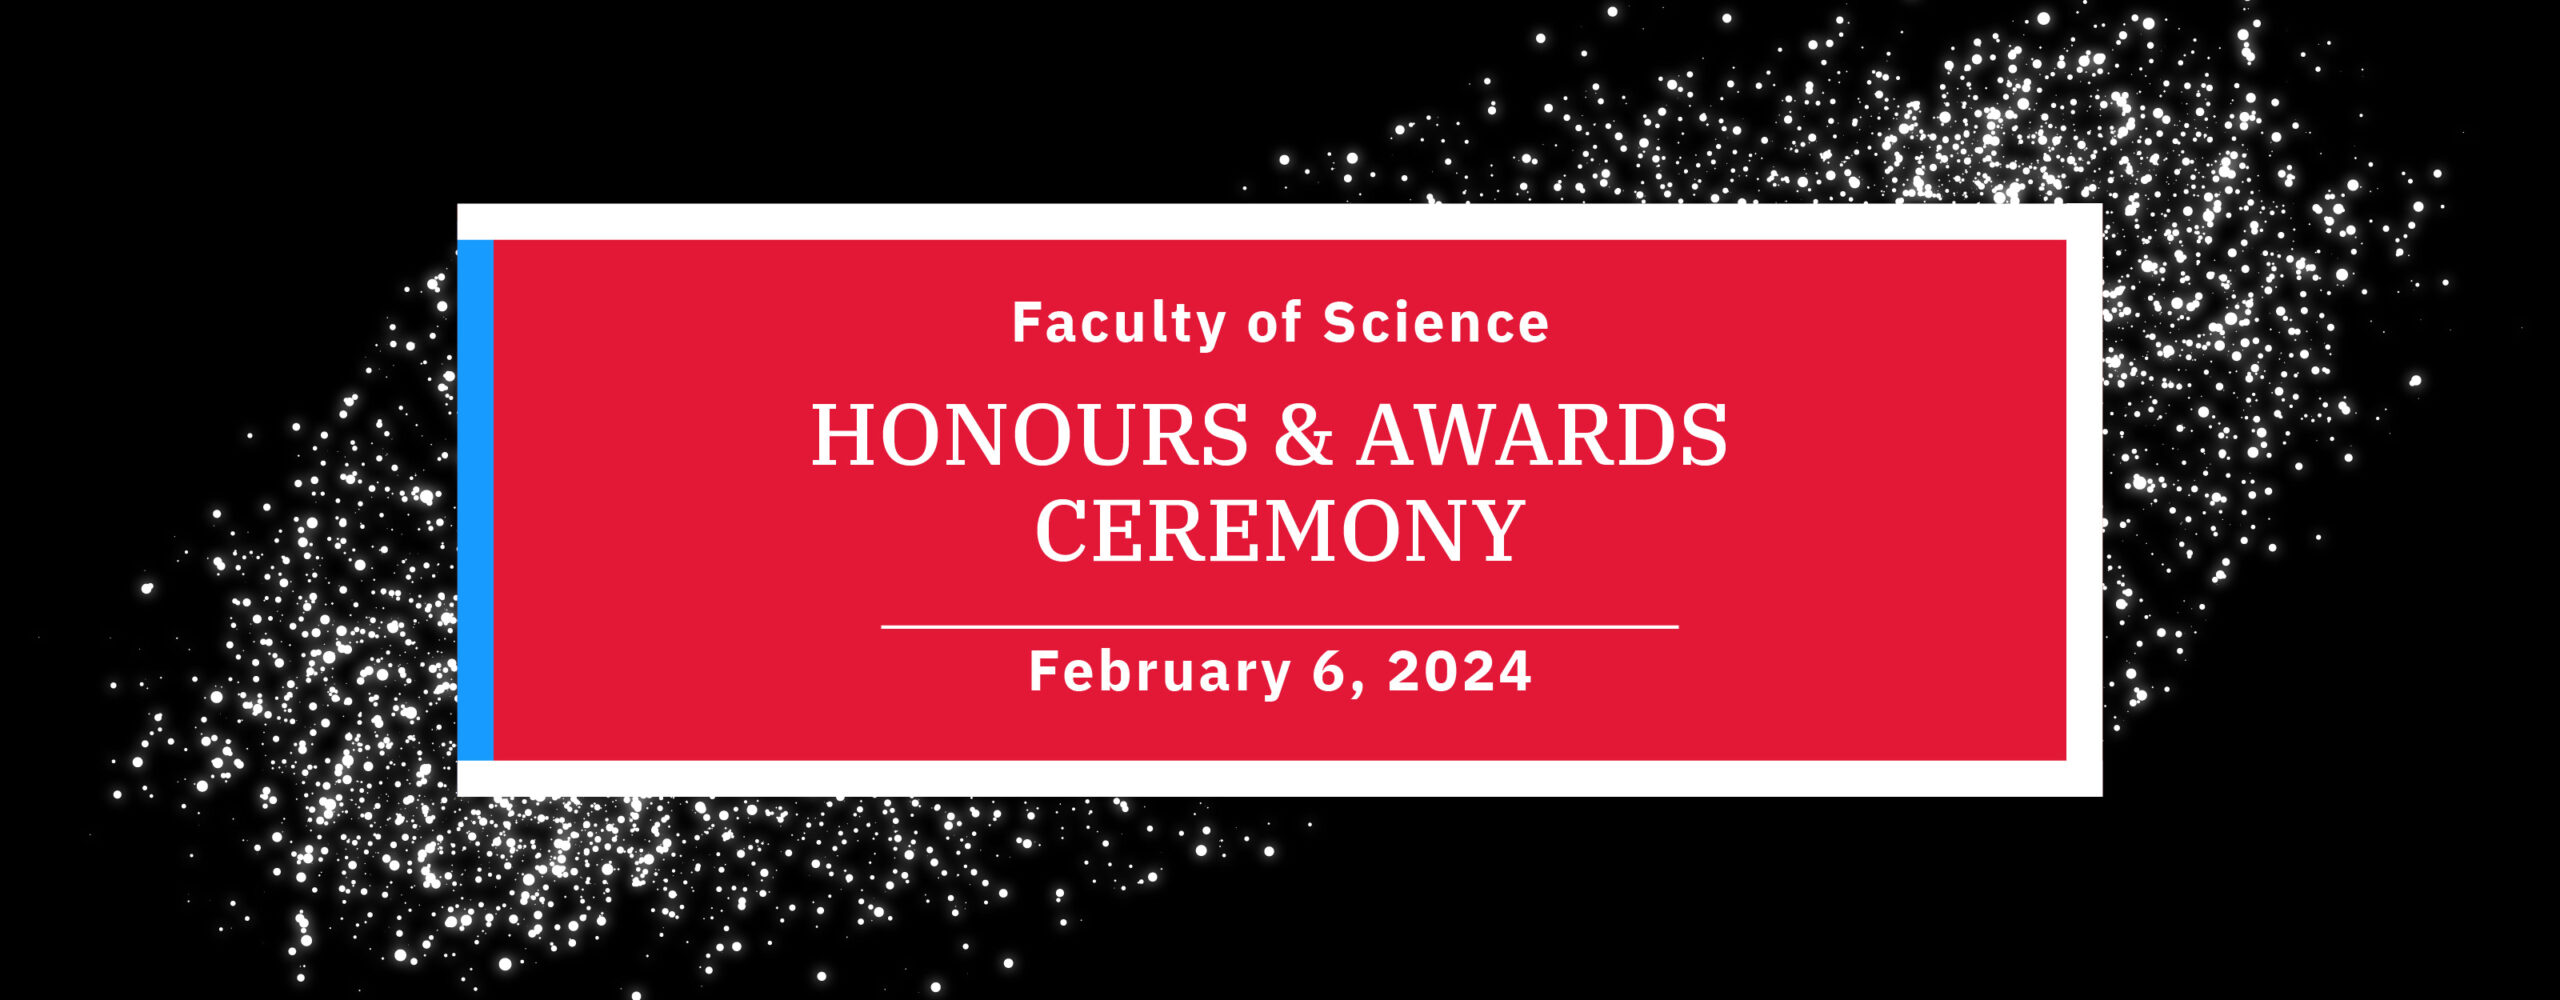 Faculty of Science Honours & Awards Ceremony February 6, 2024